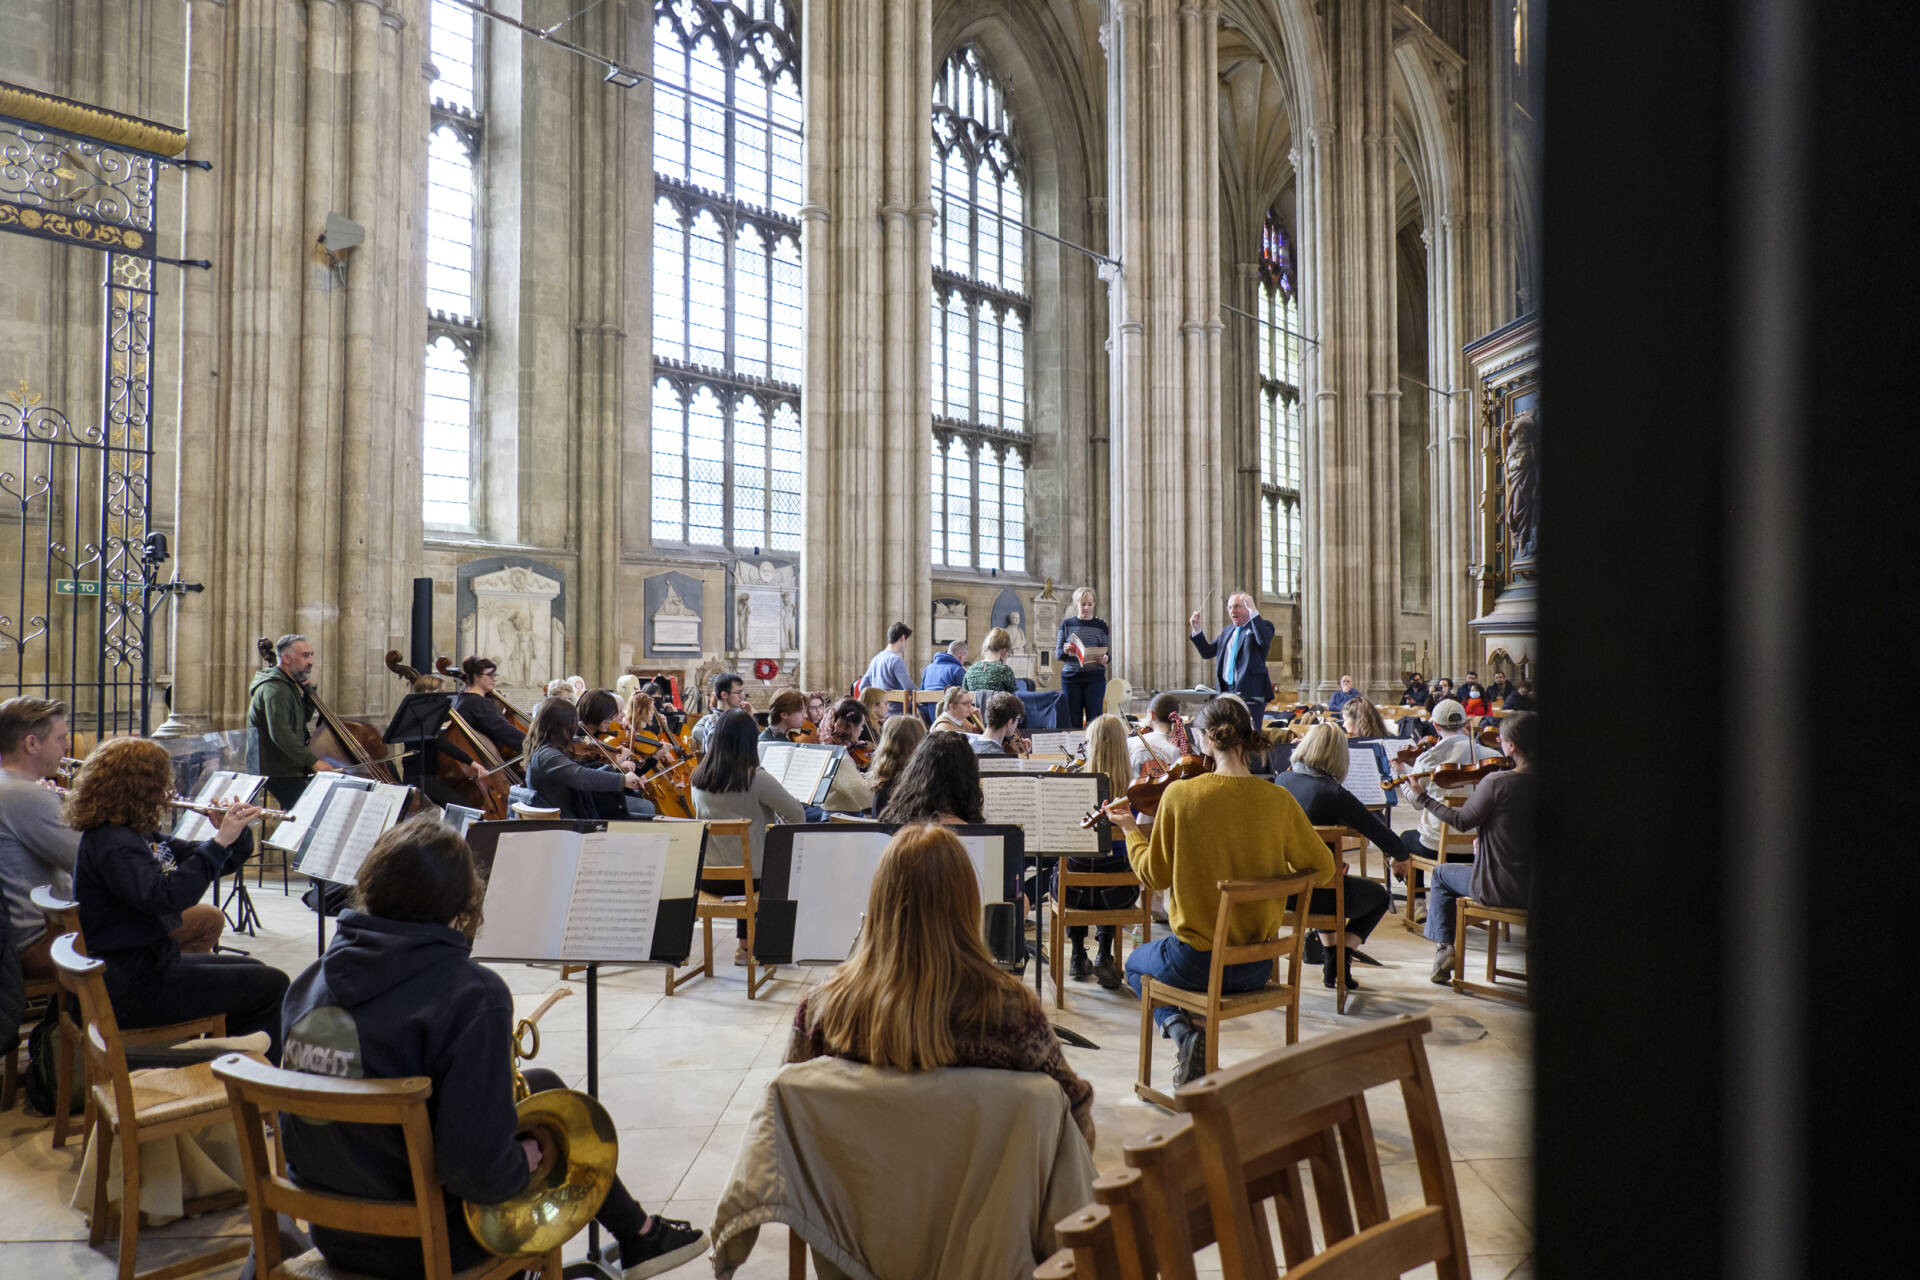 View from behind a group of orchestral players rehearsing in the Nave of a cathedral